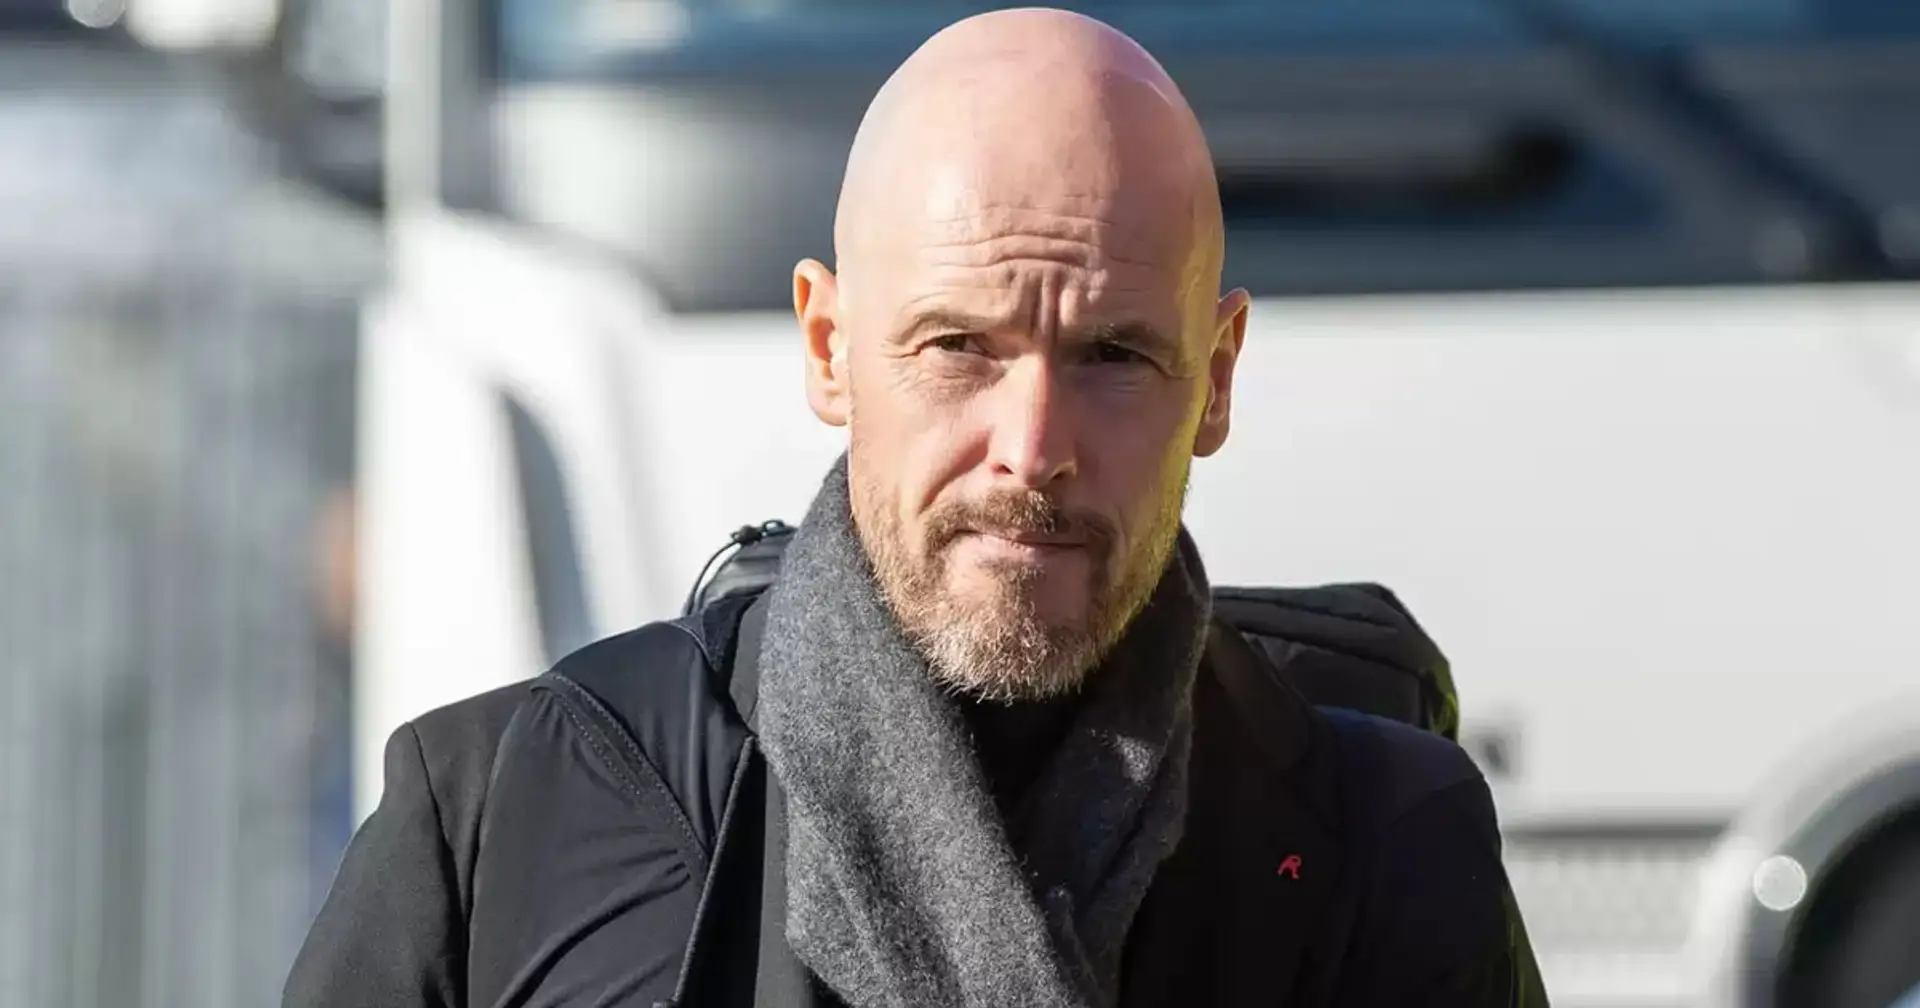 Ajax 'show signs' of reaching possible deal with United over Erik Ten Hag